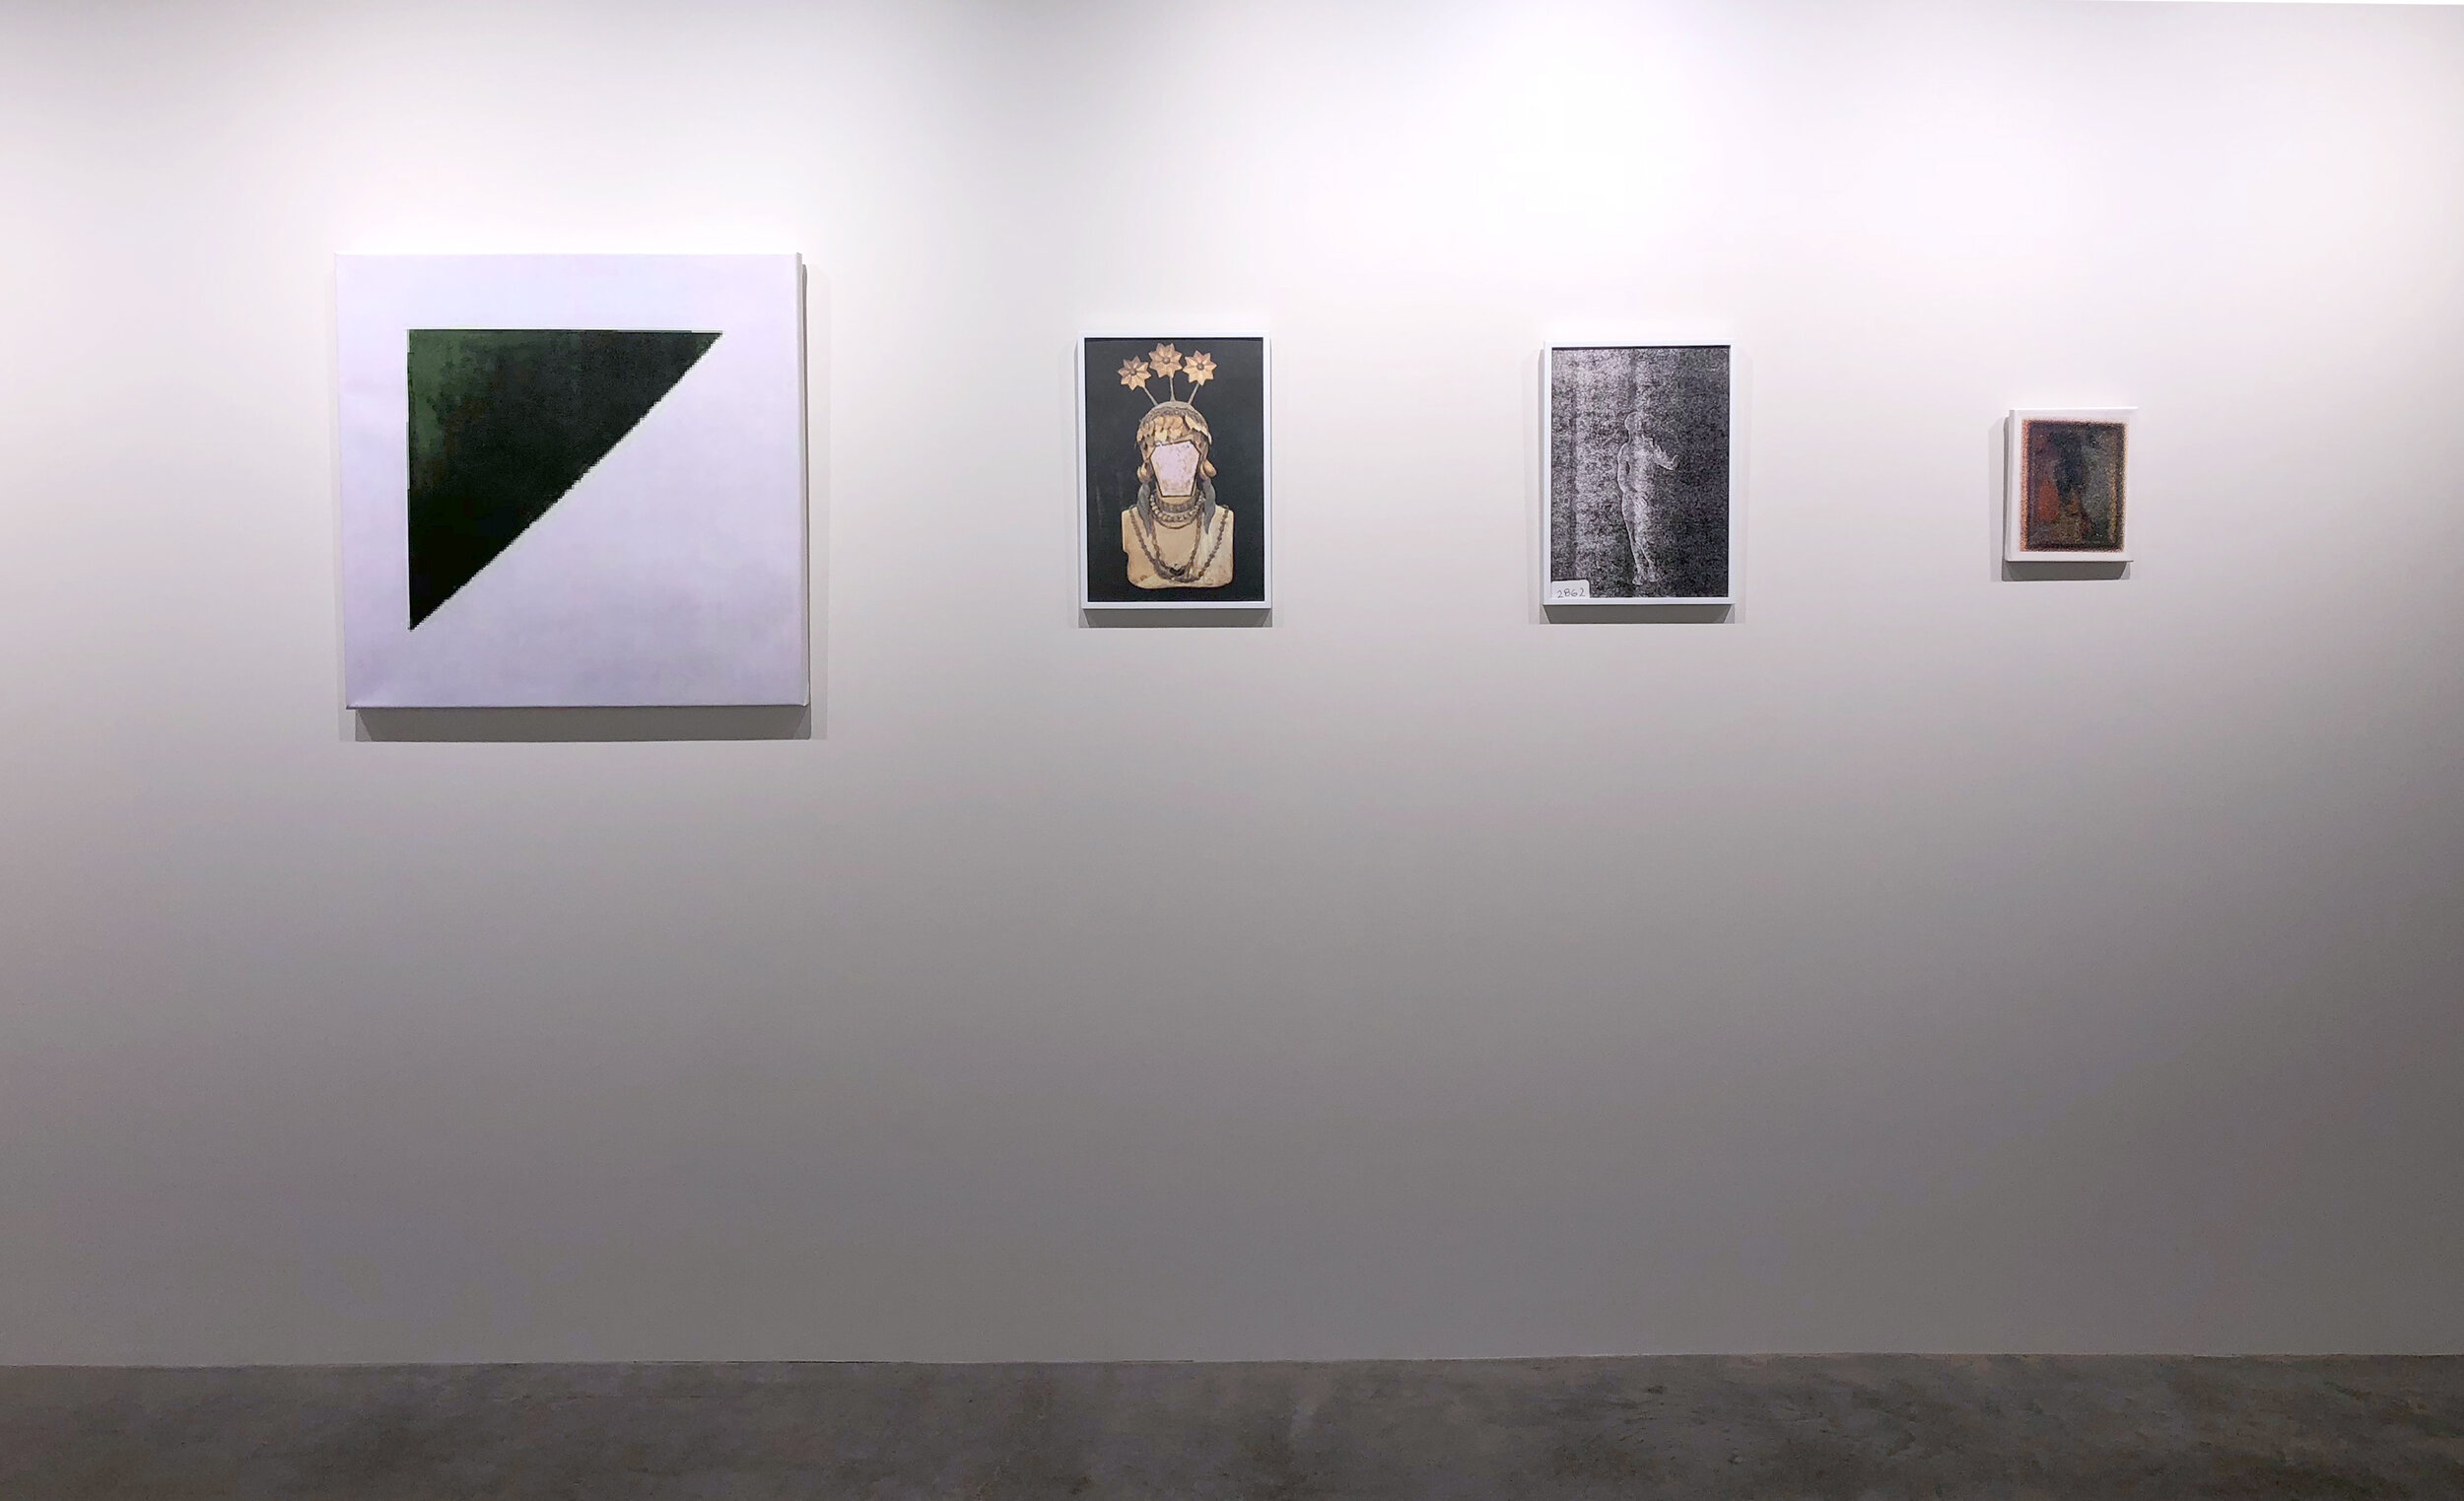  Installation view of  Altered States  at AAHD Gallery, University of Notre Dame 